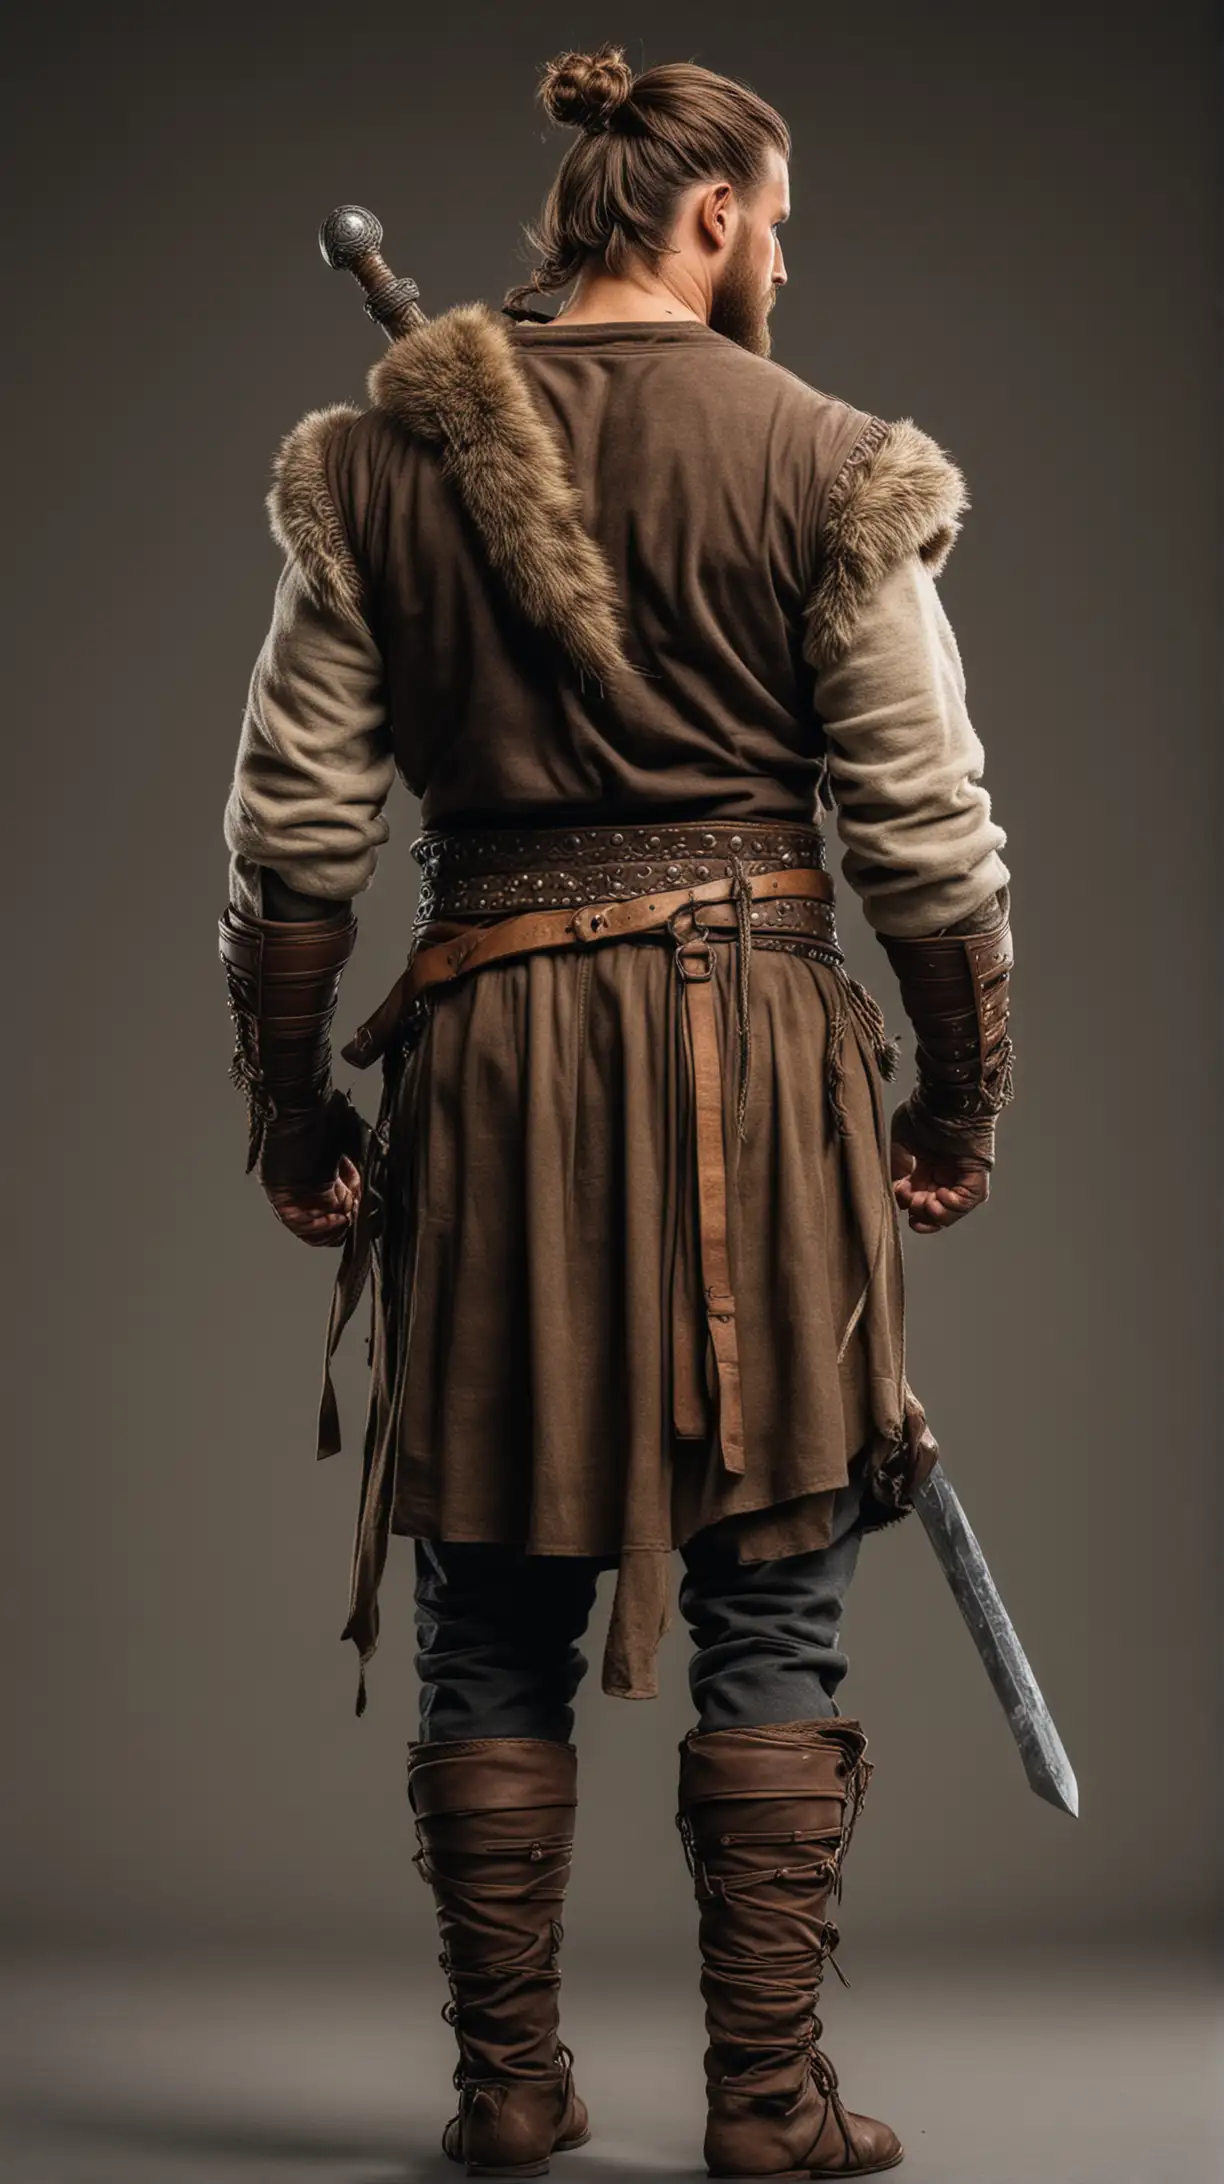 muscular viking warrior, back view, do not show face, short hair tied high man bun, brown hair, full body, warrior clothes, fur sleeves, well proportioned
